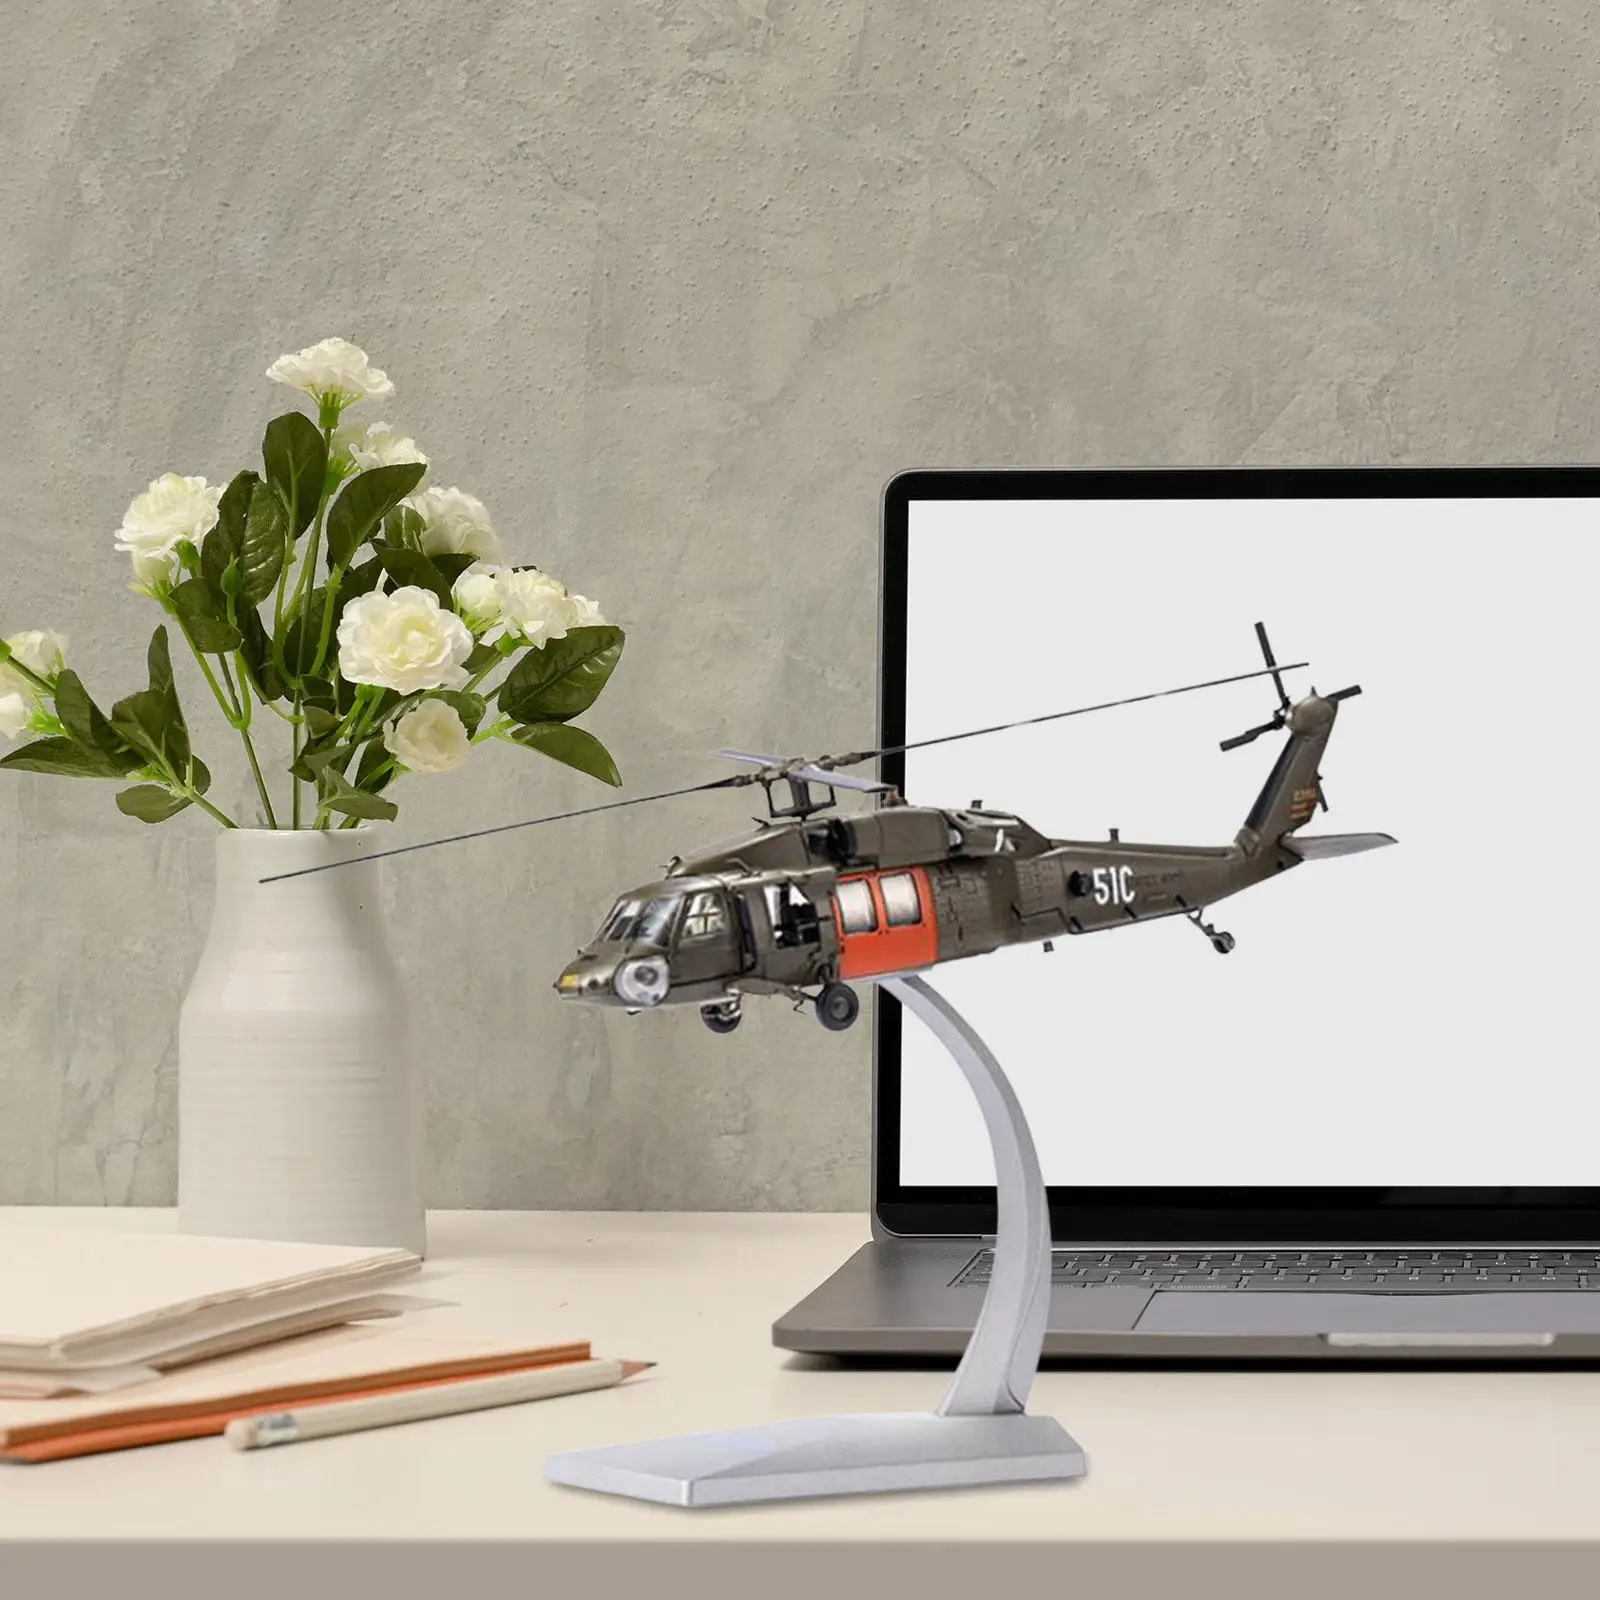 

1/72 UH 60 Black Hawk Fighter Airplane Diecast Model Gift Helicopter Simulation Retro Plane for Bookshelf Home Living Room Cafe